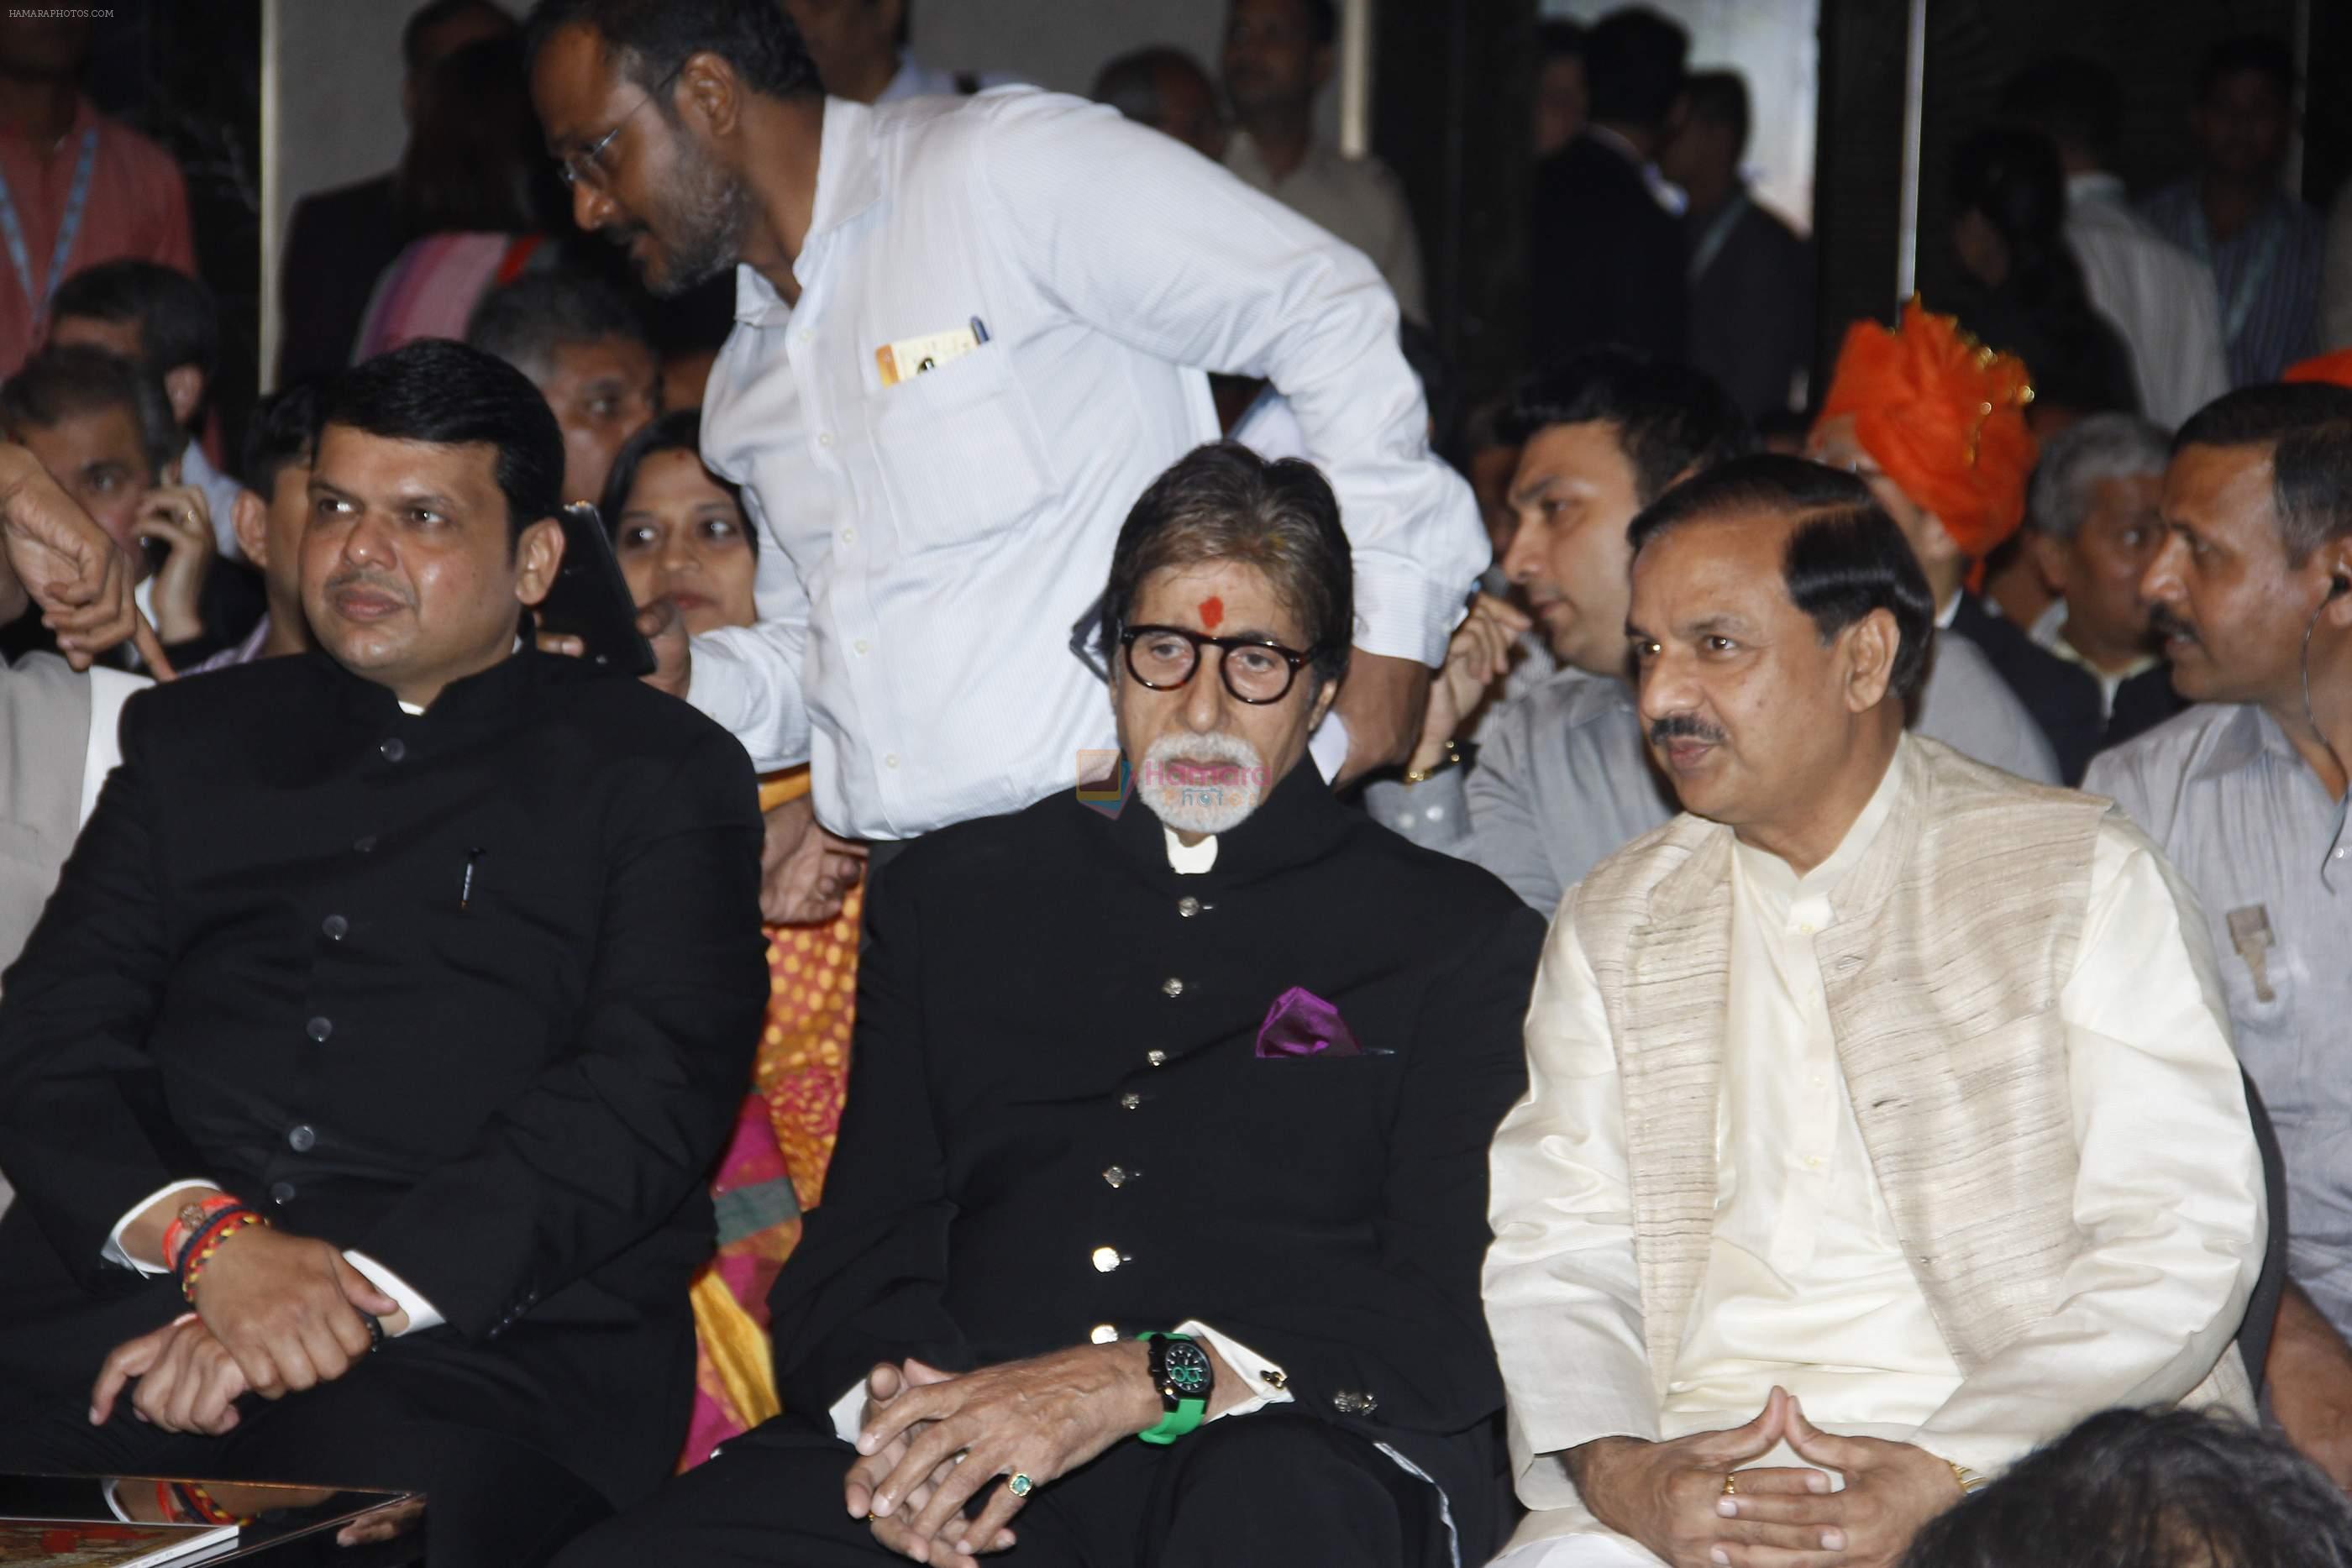 Amitabh Bachchan at tourism press meet in J W Marriott on 28th Sept 2015